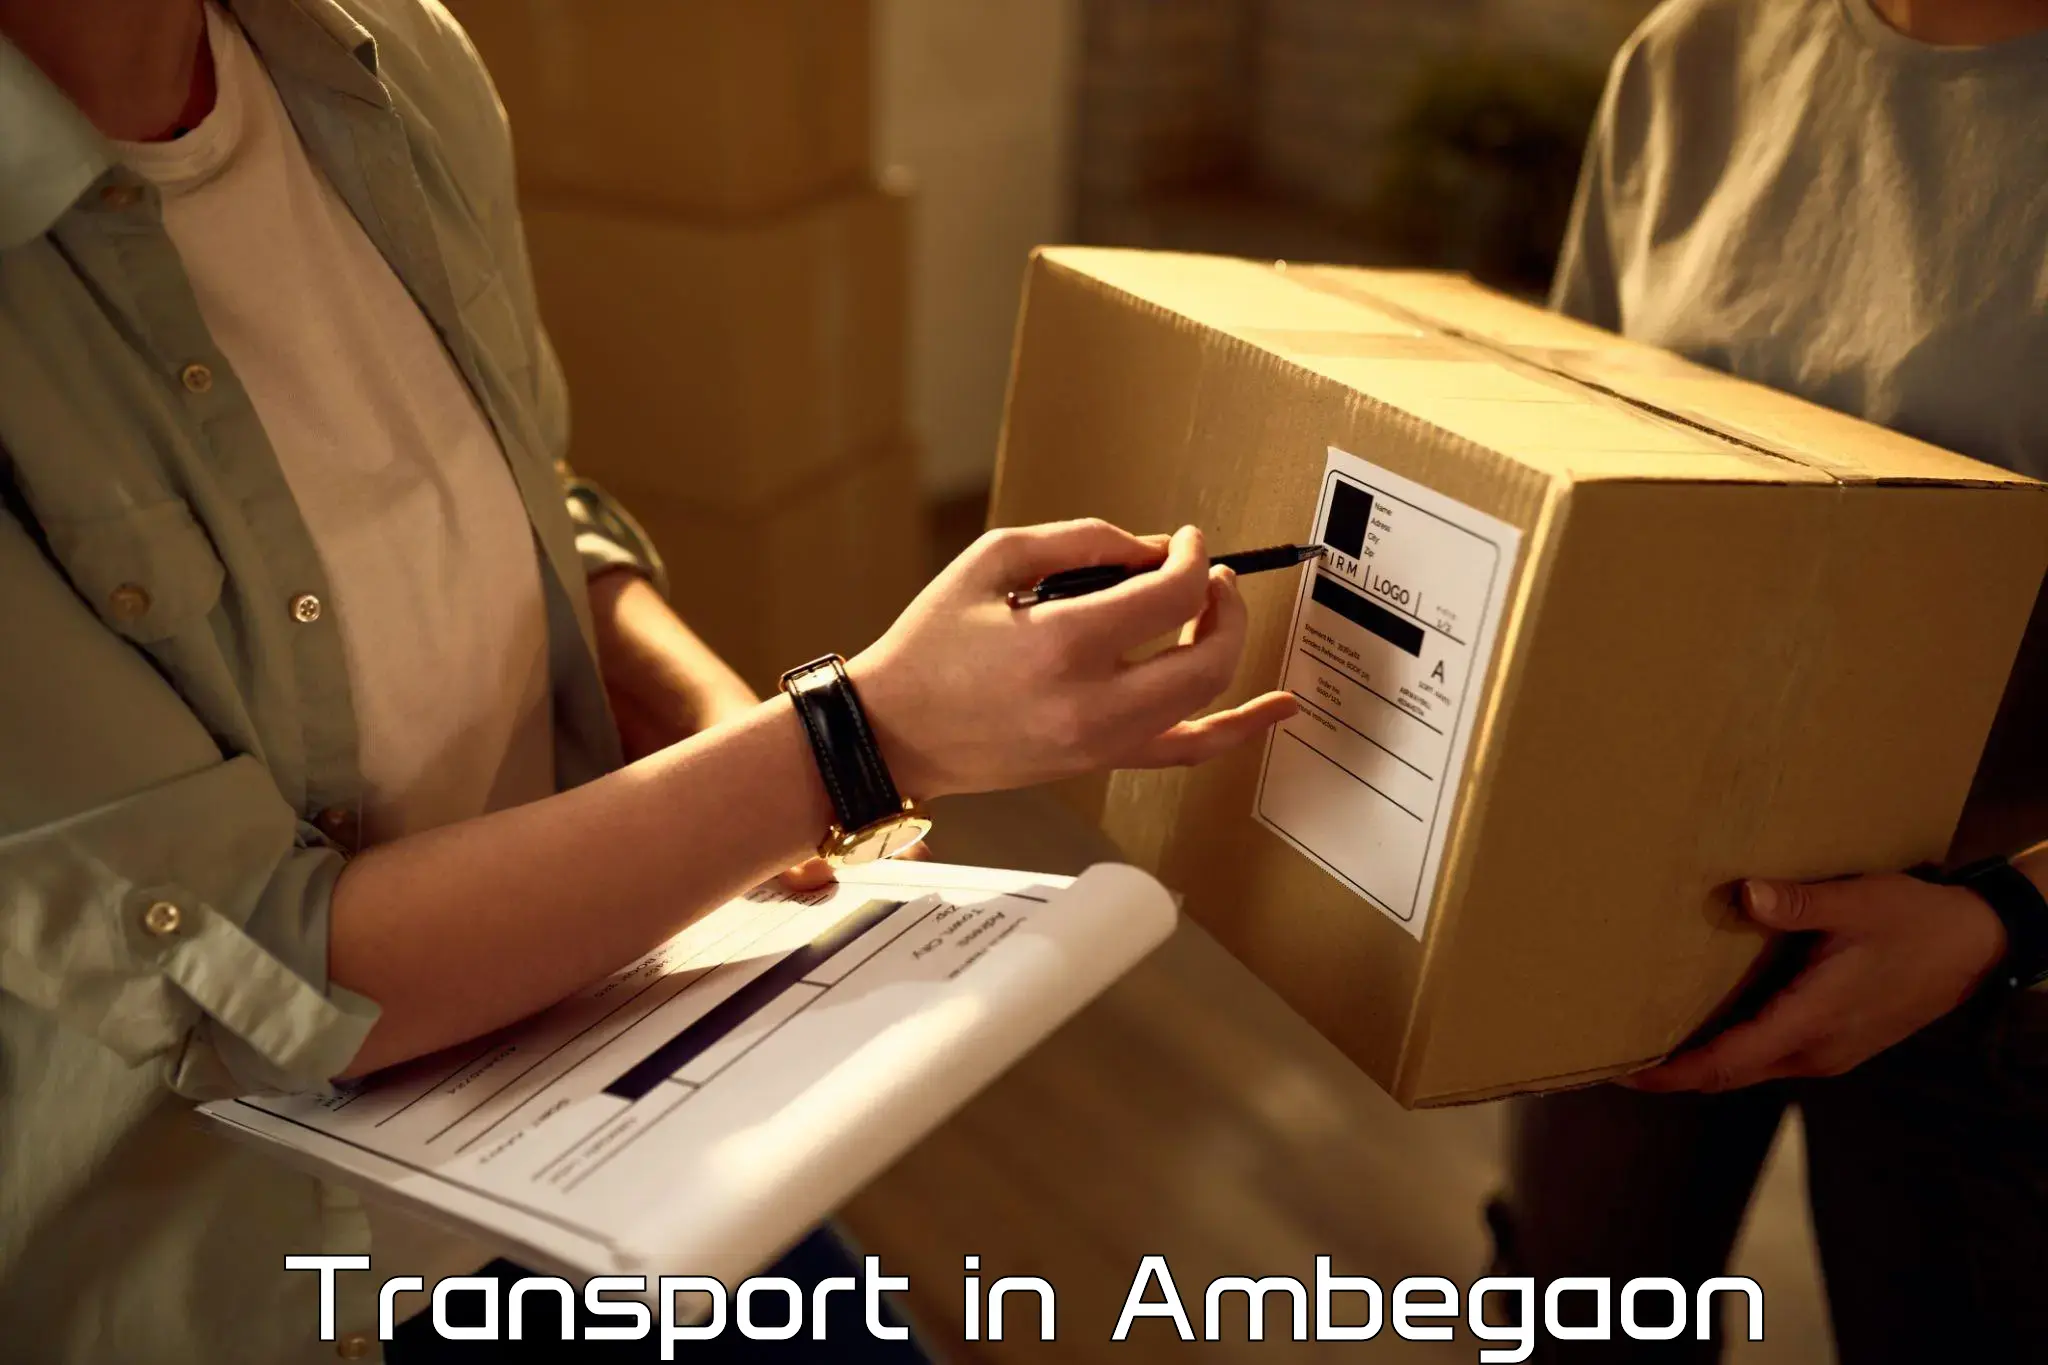 Delivery service in Ambegaon